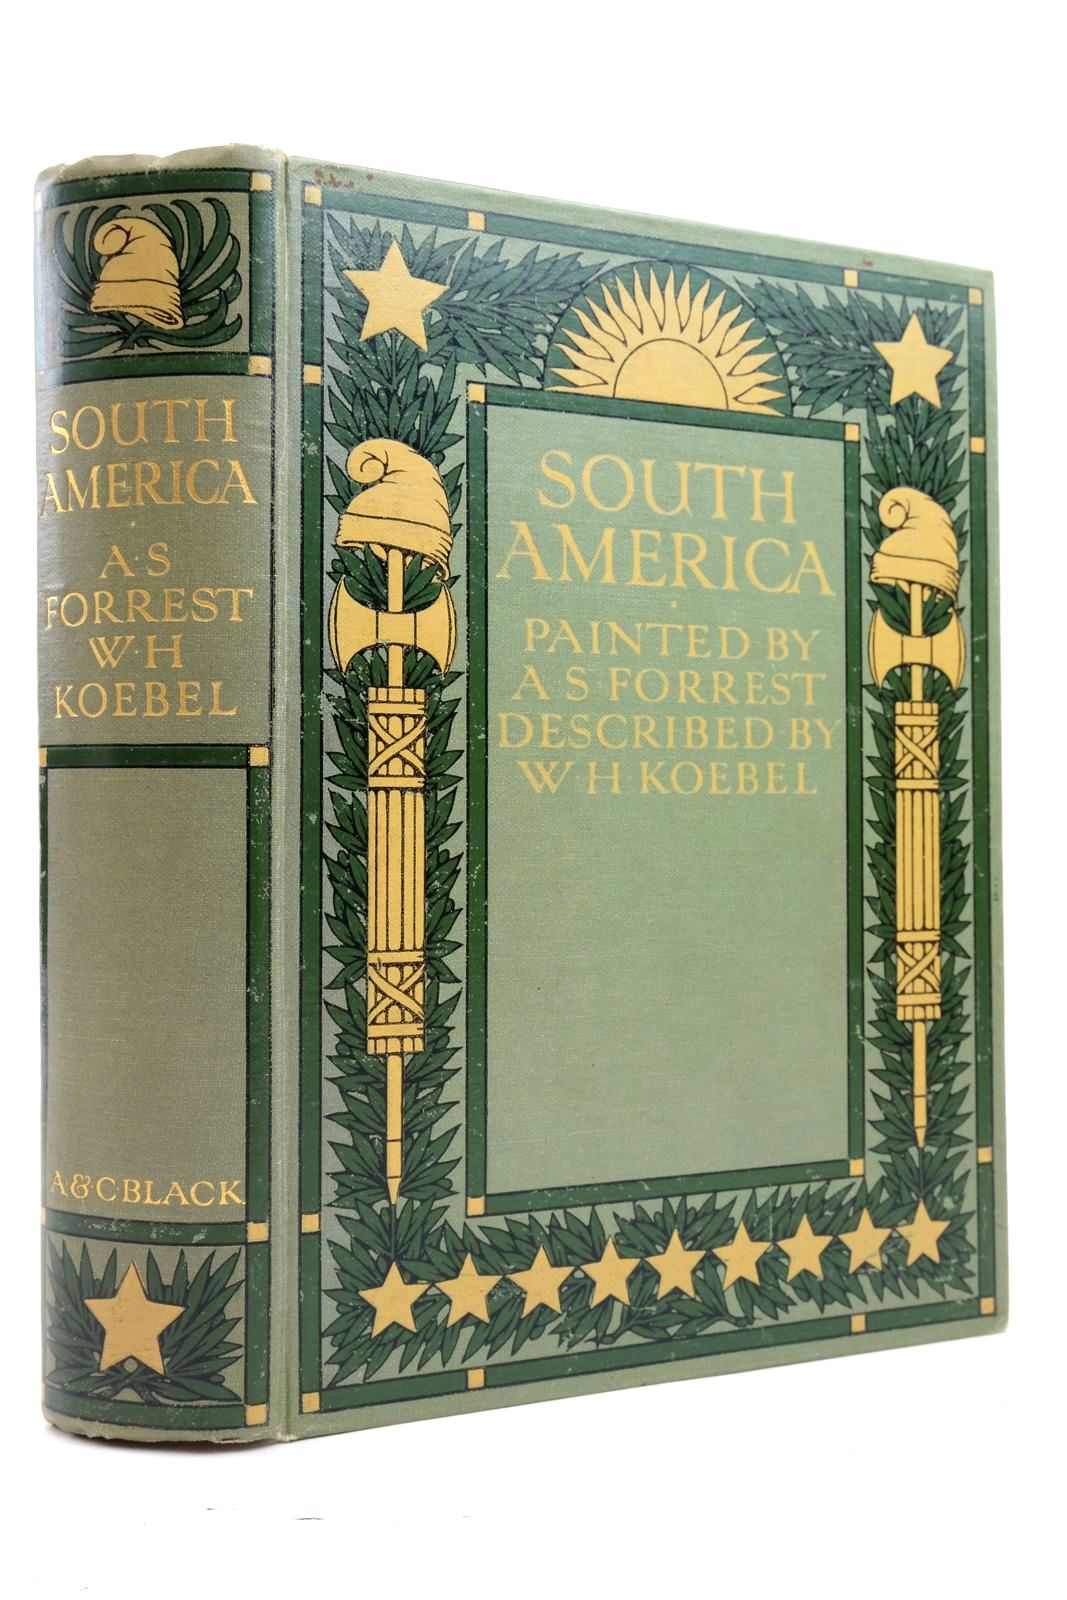 Photo of SOUTH AMERICA written by Koebel, W.H. illustrated by Forrest, A.S. published by A. &amp; C. Black (STOCK CODE: 2137130)  for sale by Stella & Rose's Books